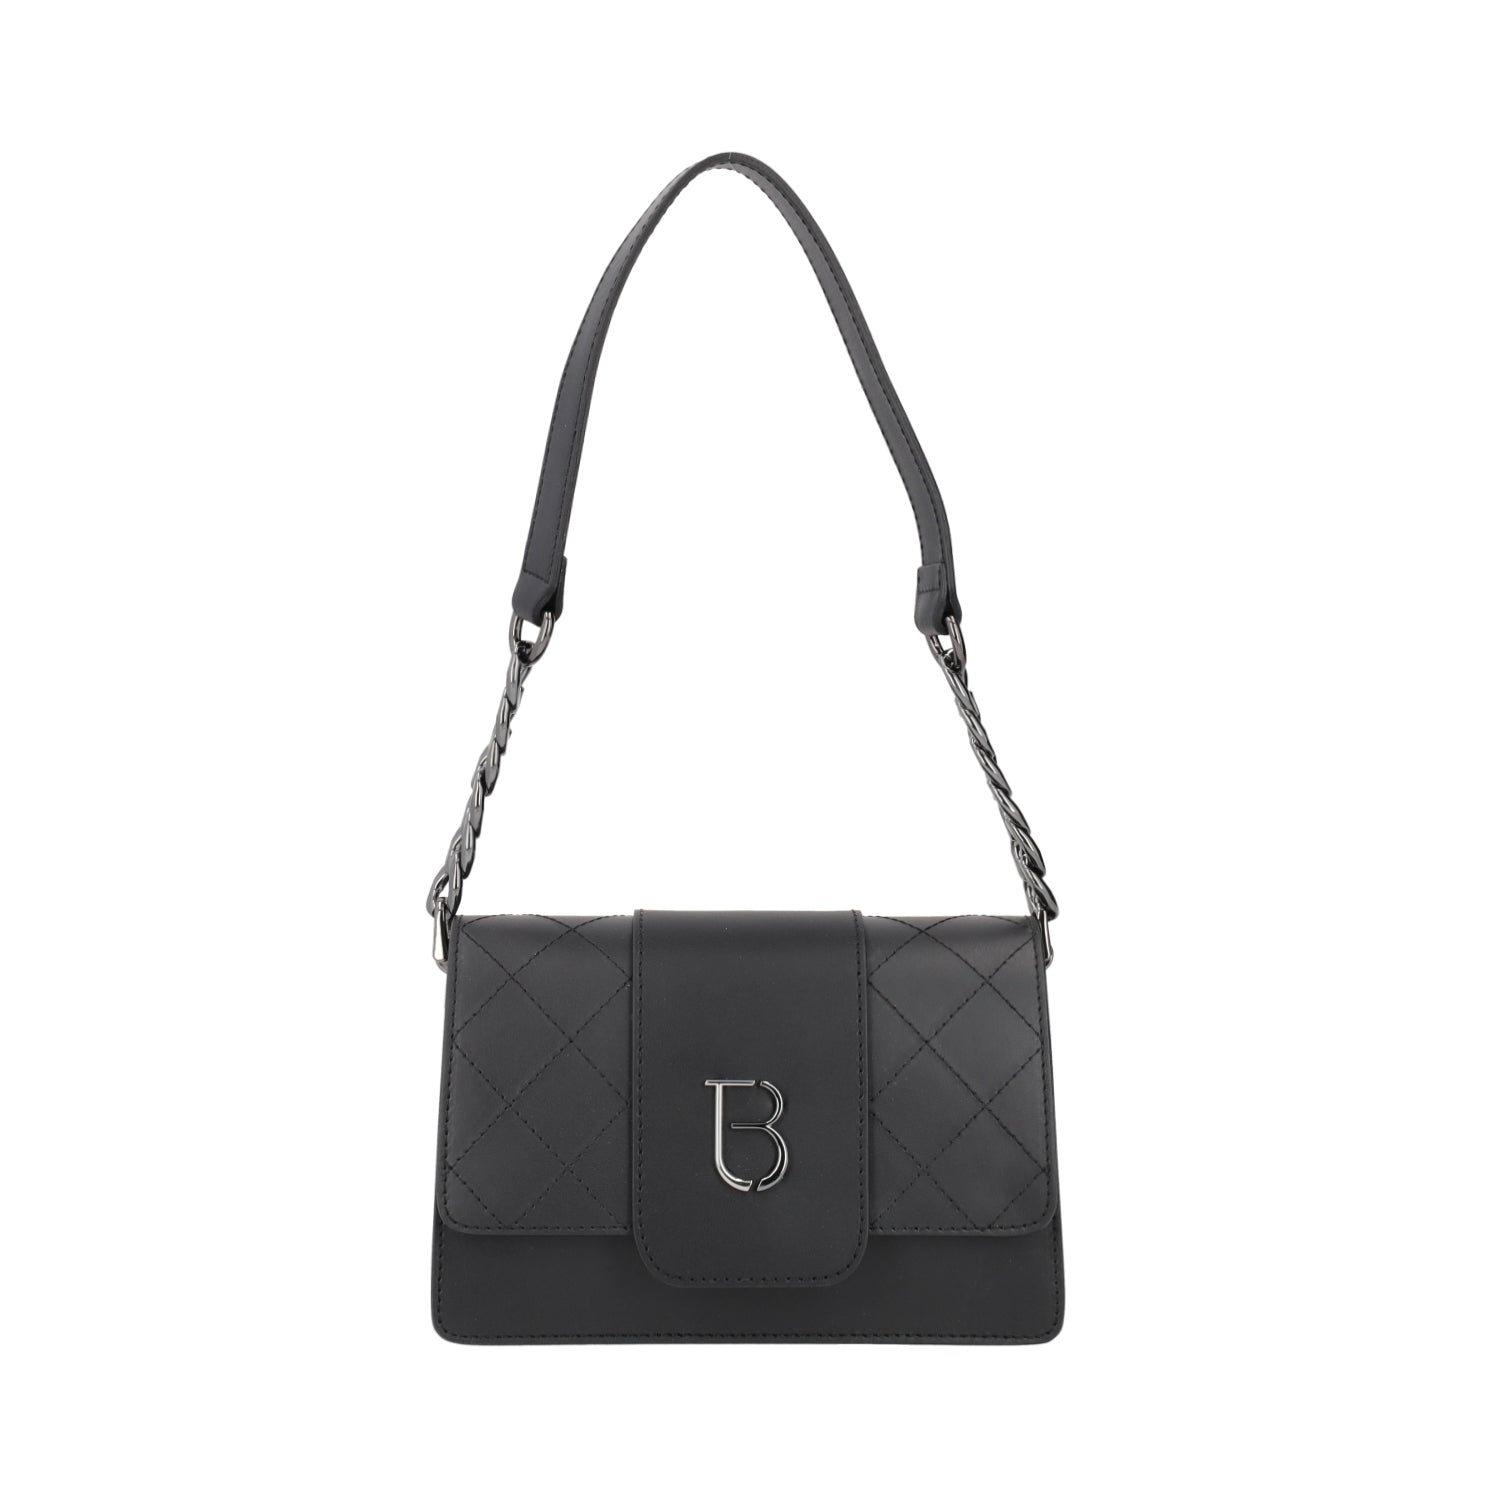 Women's bags: elegant, practical and colorful